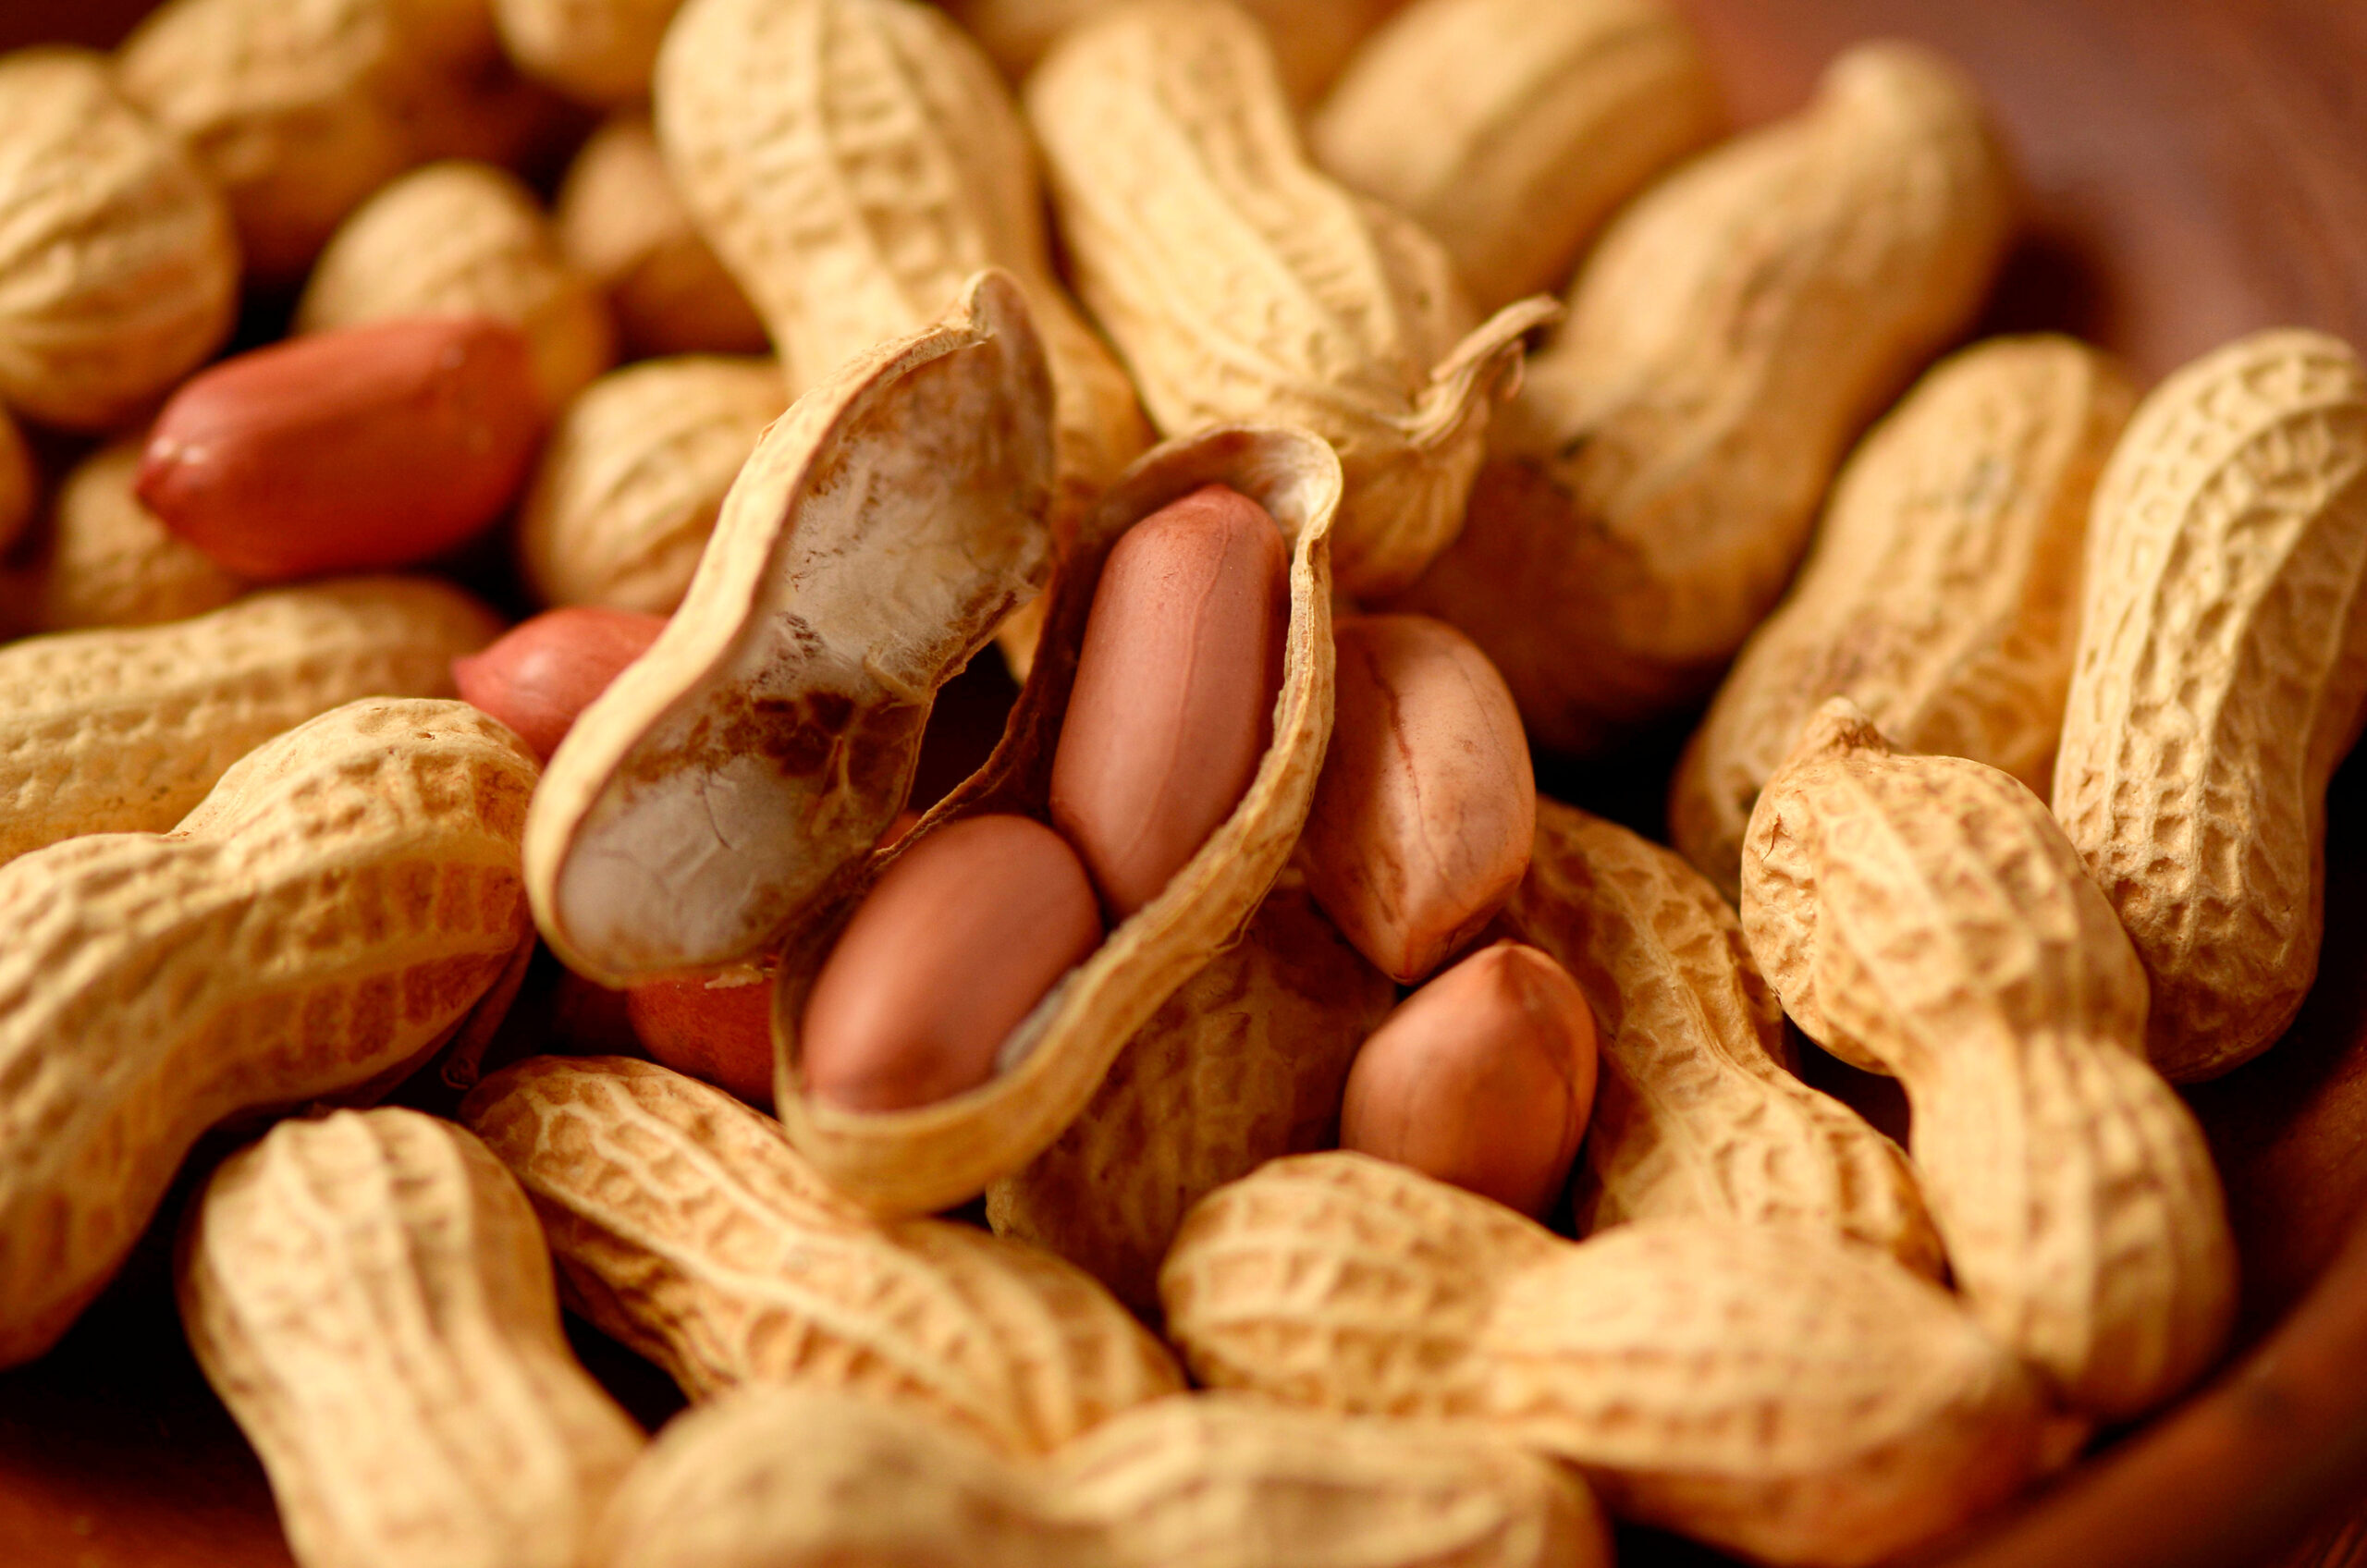 Peanuts can cause allergic reactions